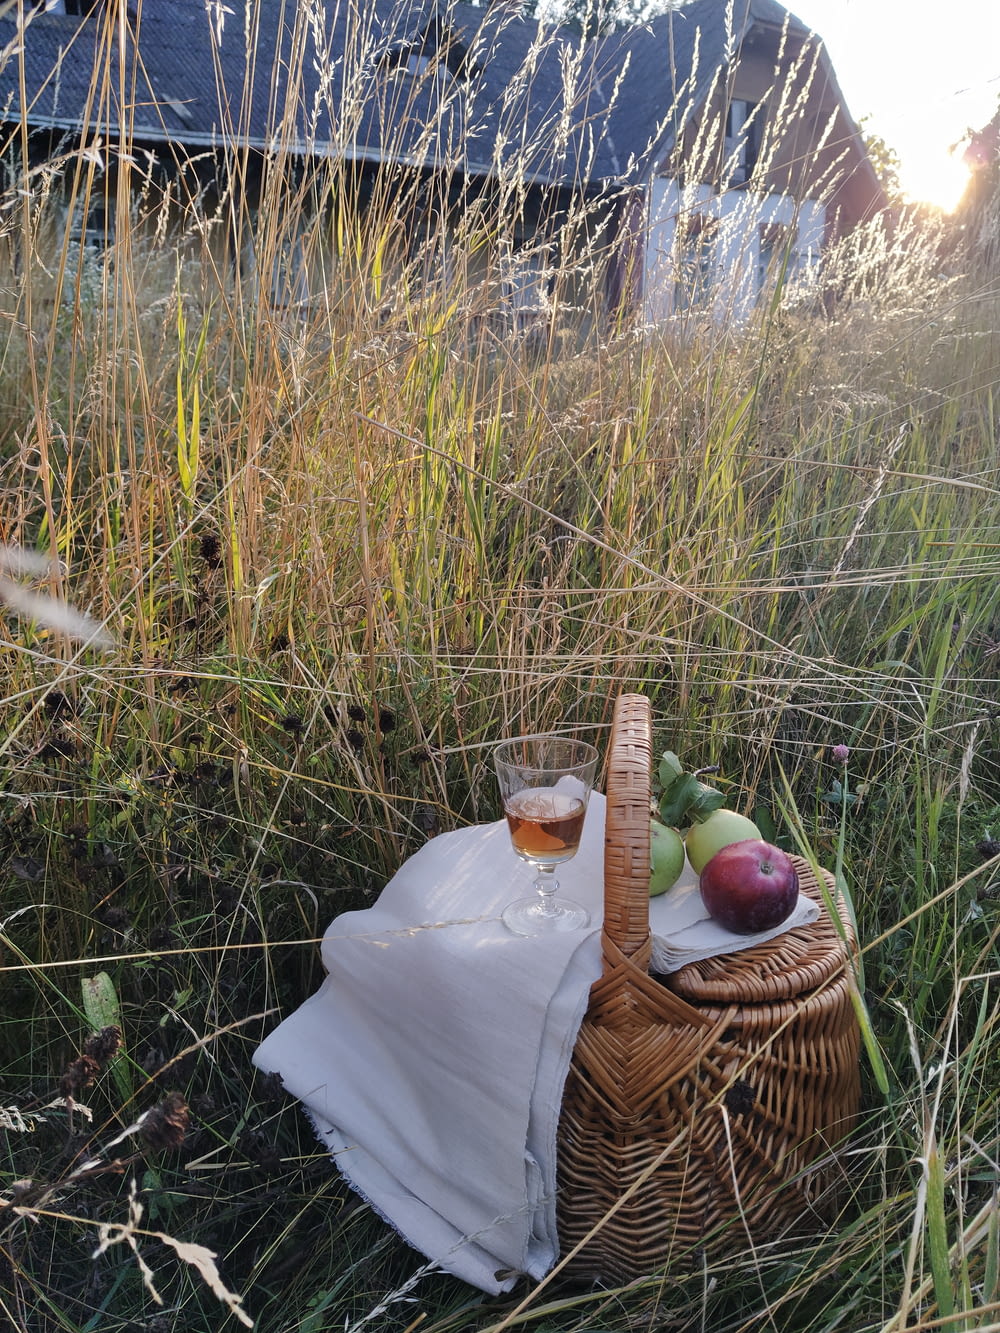 a basket of fruit and a glass of wine in a field